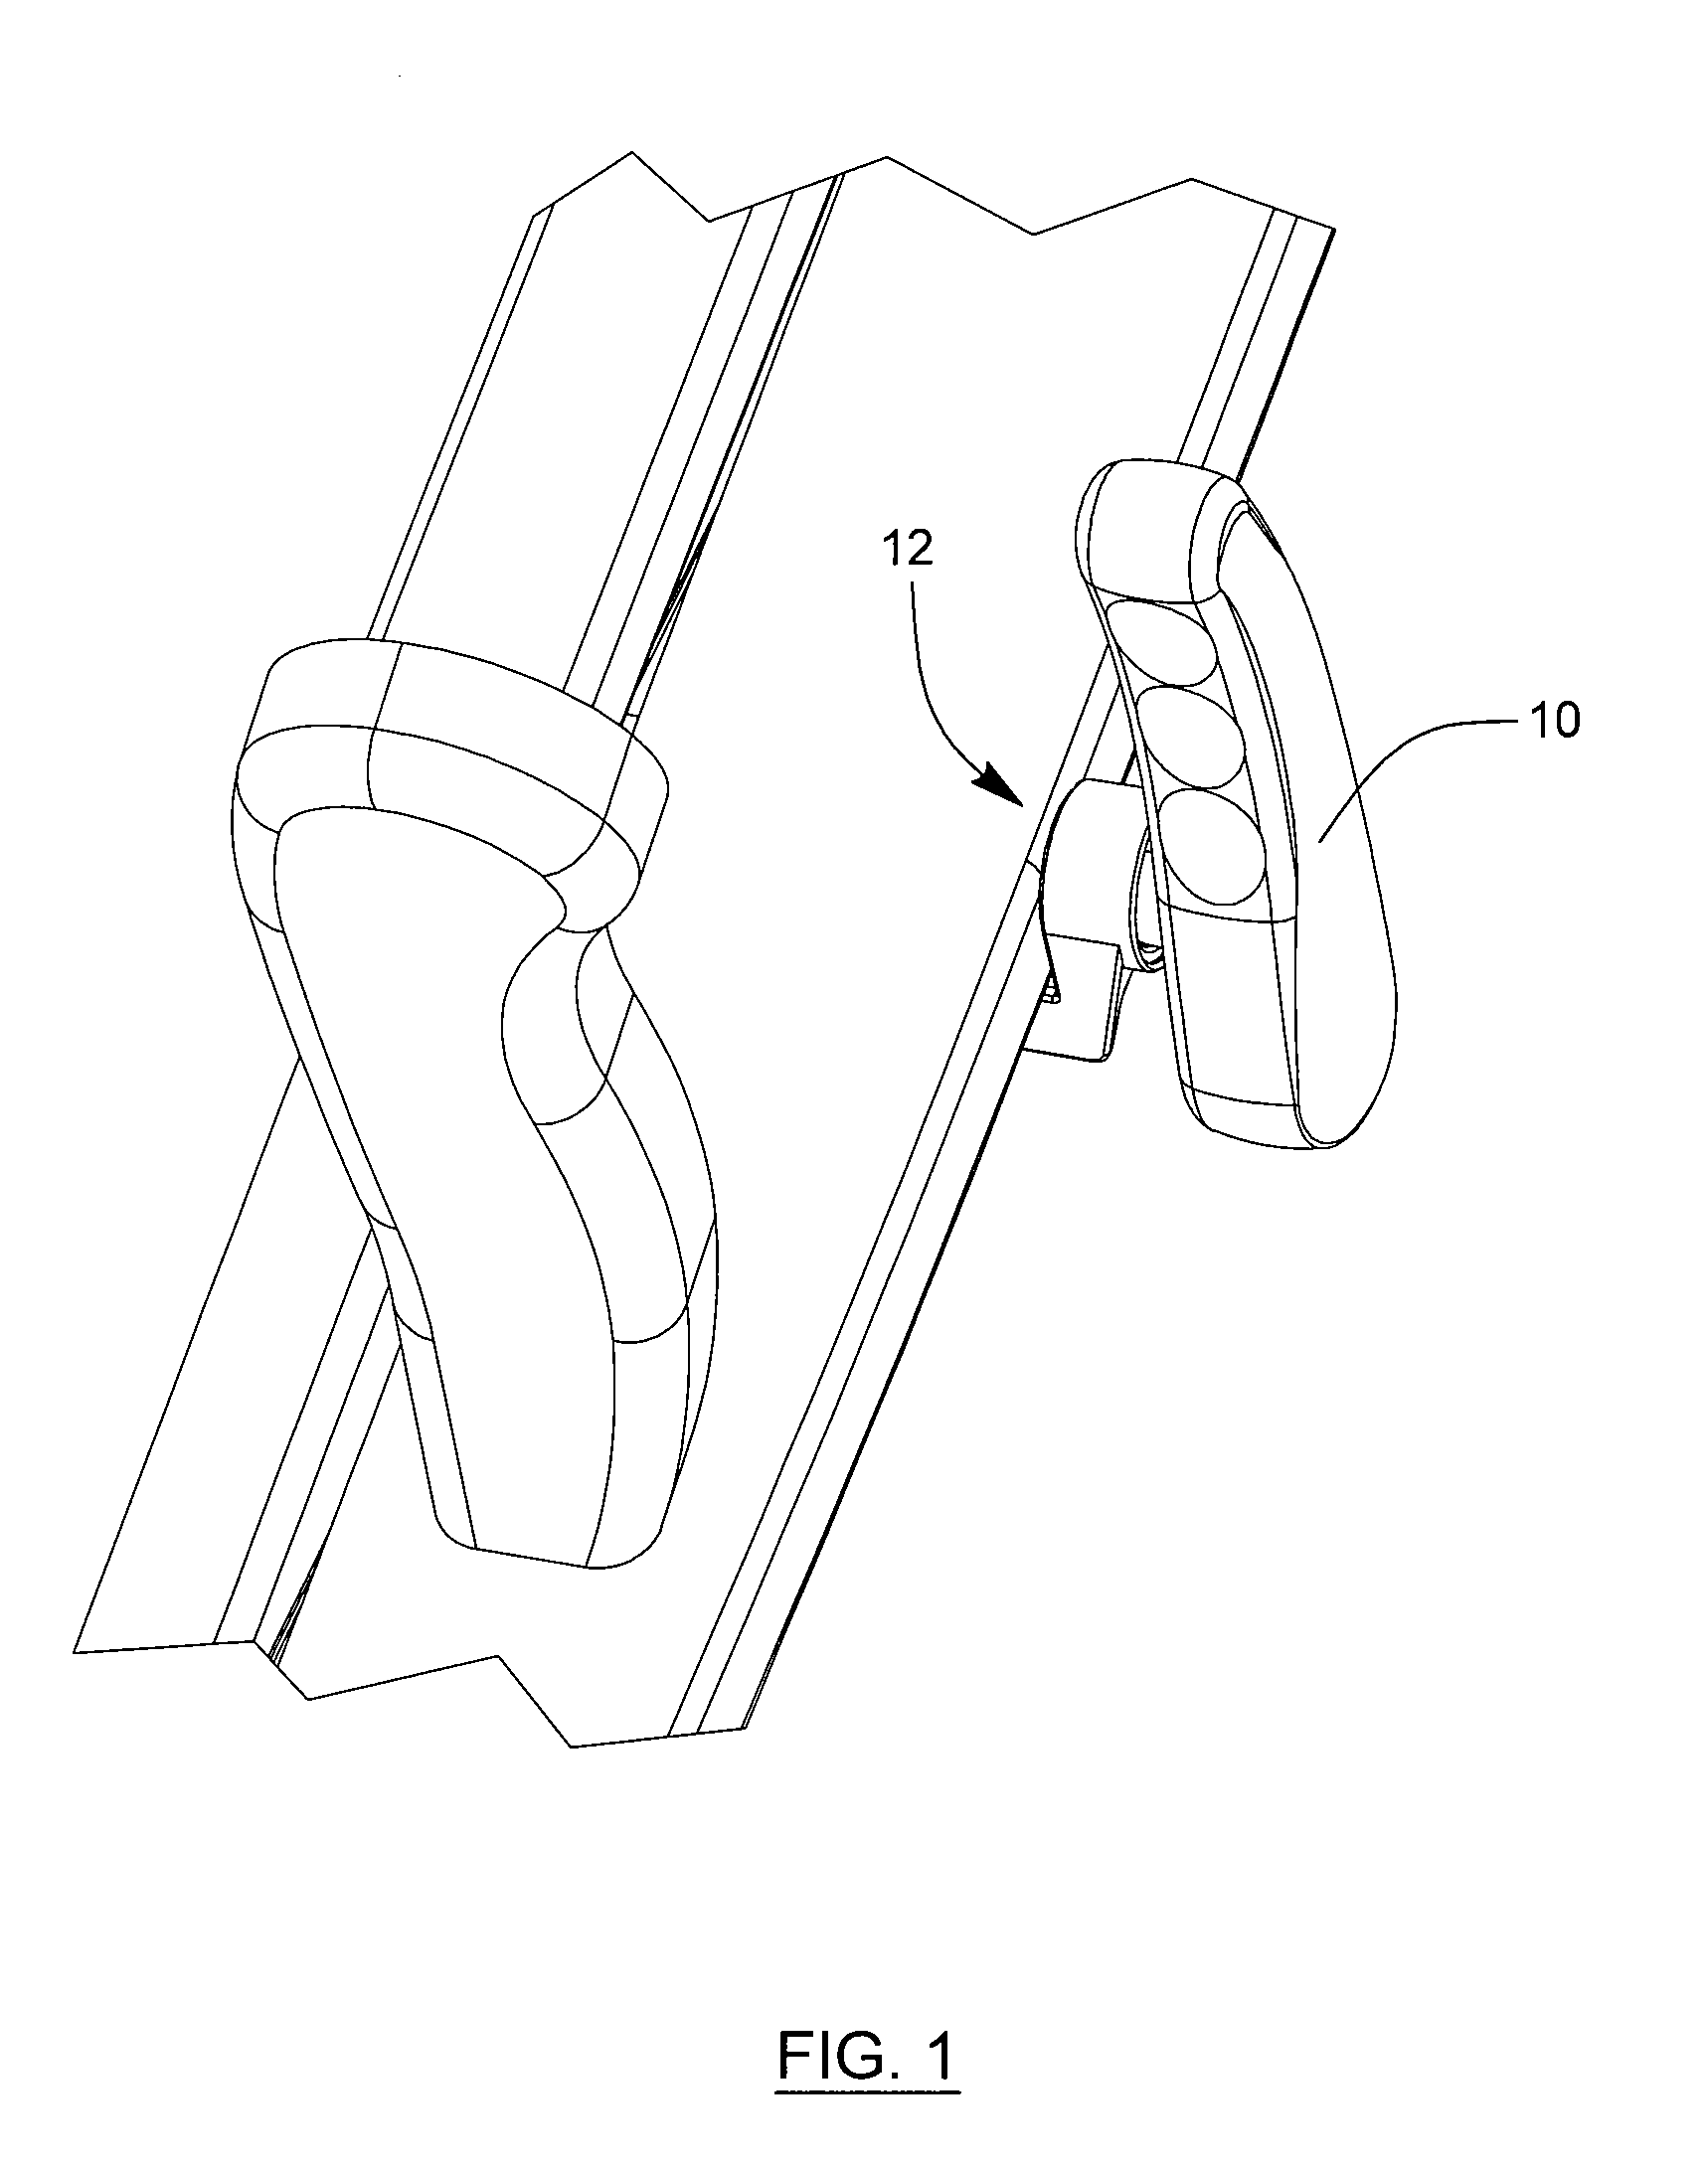 Spiral jaw locking mechanism for adjustment system in chairs